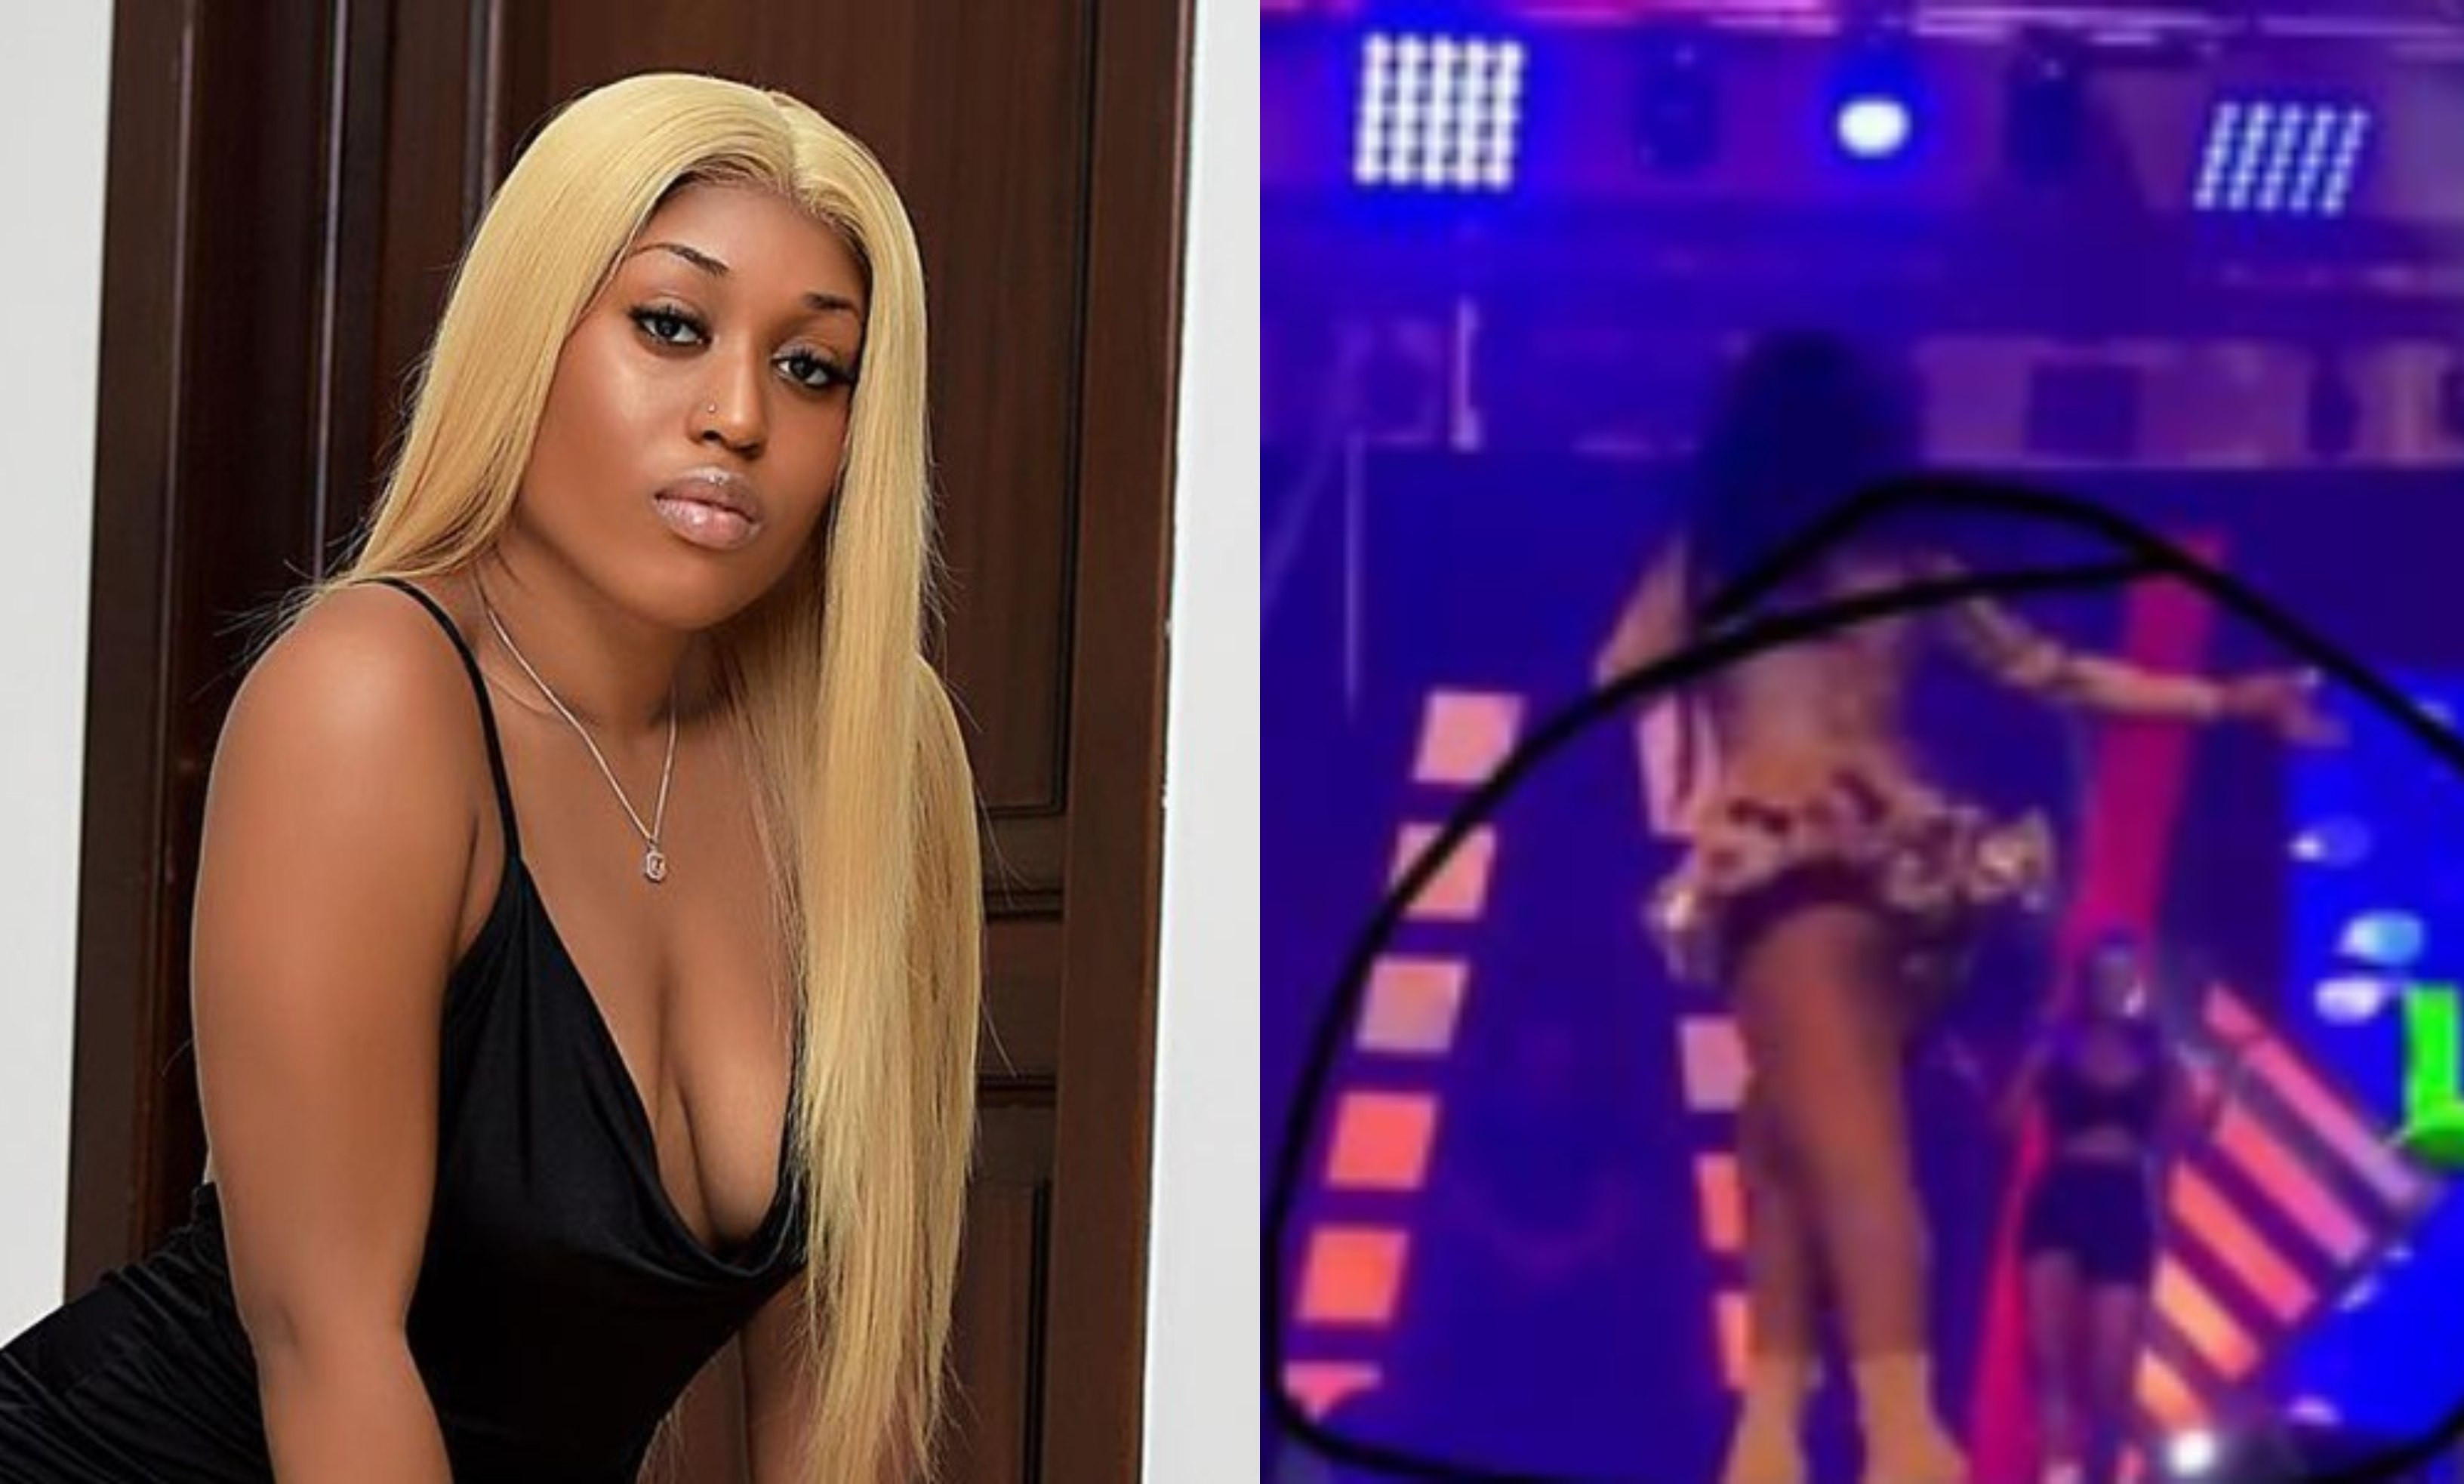 Fantana performing at Shatta Wale's Reign Concert and Wonder Boy album launch